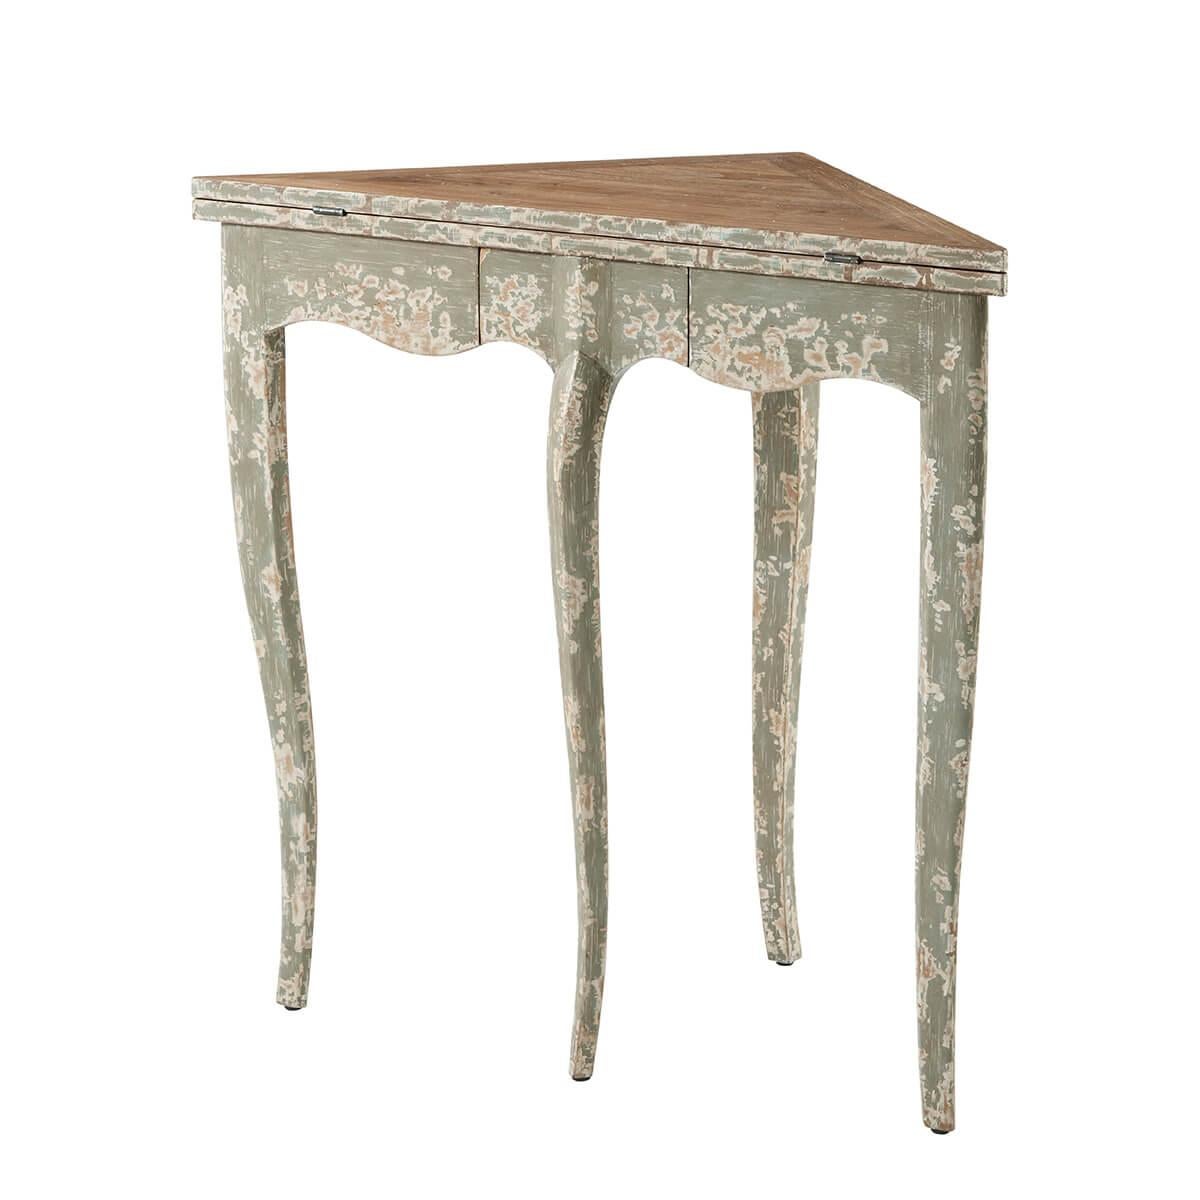 This small corner triangular fold-over hinged top game table opens to a square form table. In a hand-finished, distressed, and antiqued painted finish and raised on slender cabriole legs. 

Dimensions: 32